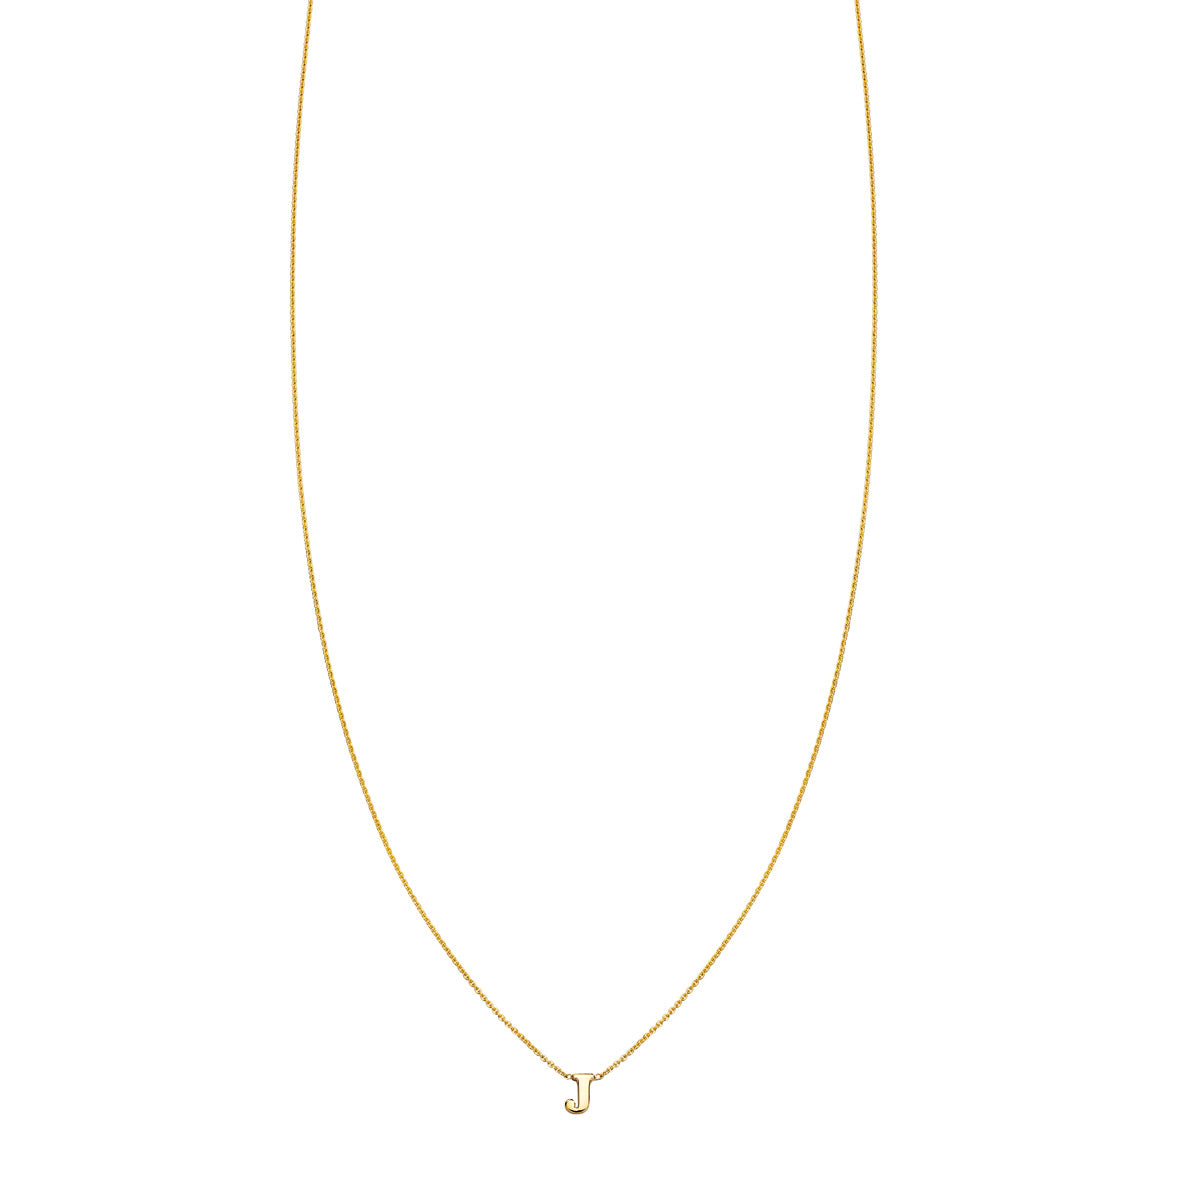 Personalized gold necklace featuring the letter 'J' by Phoenix Roze. Tailored for your individual elegance.